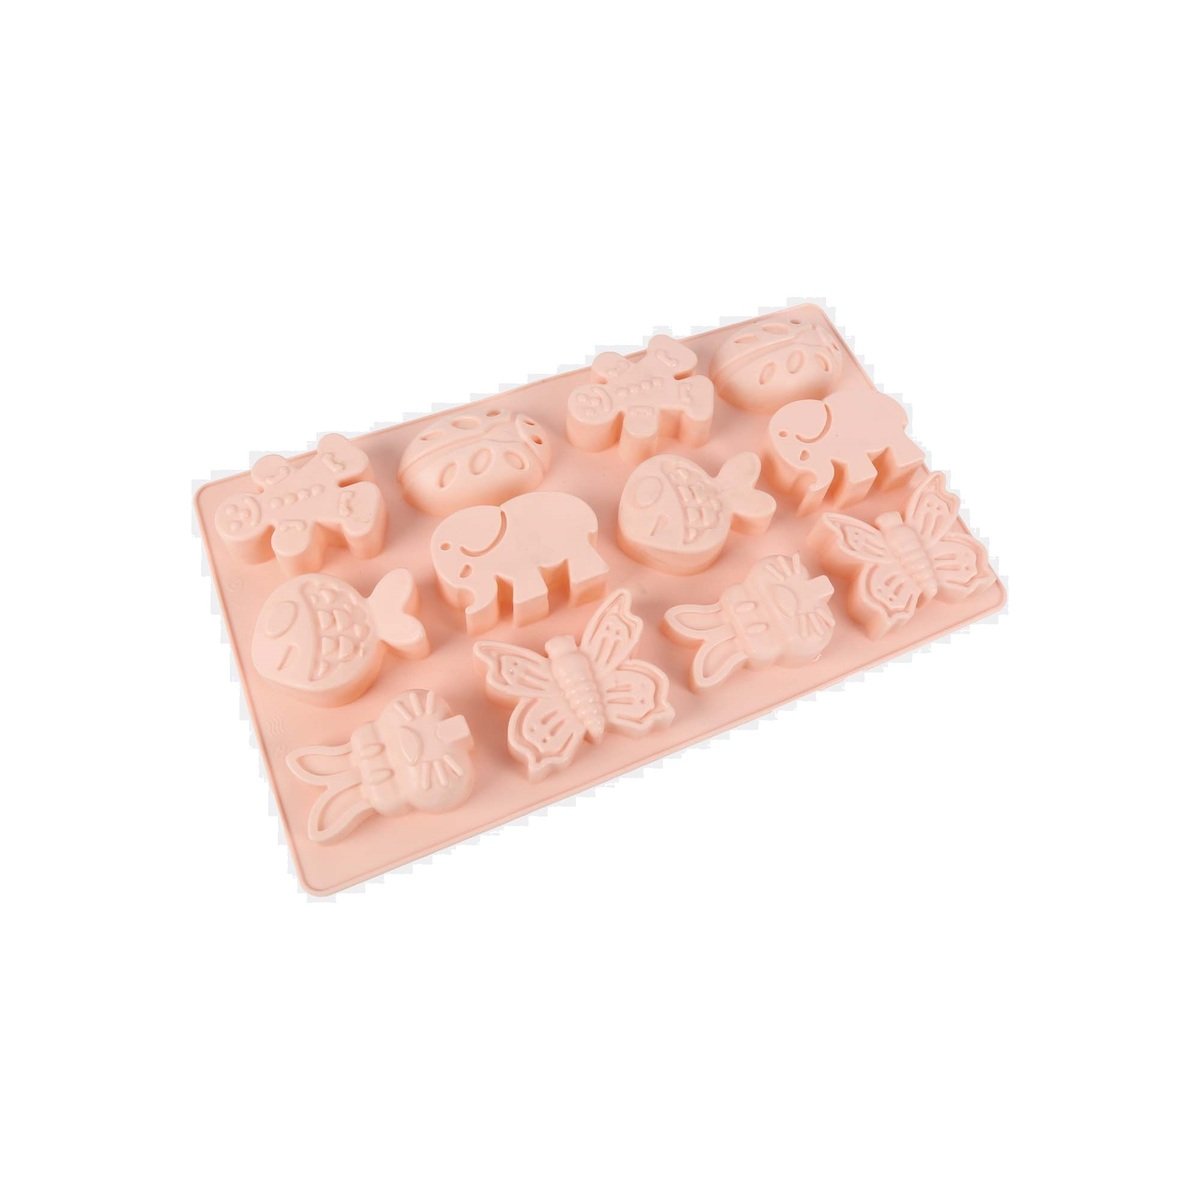 My Silicone Cavities Cookie Mould 12cup 19.5x34x4cm Colour May Very